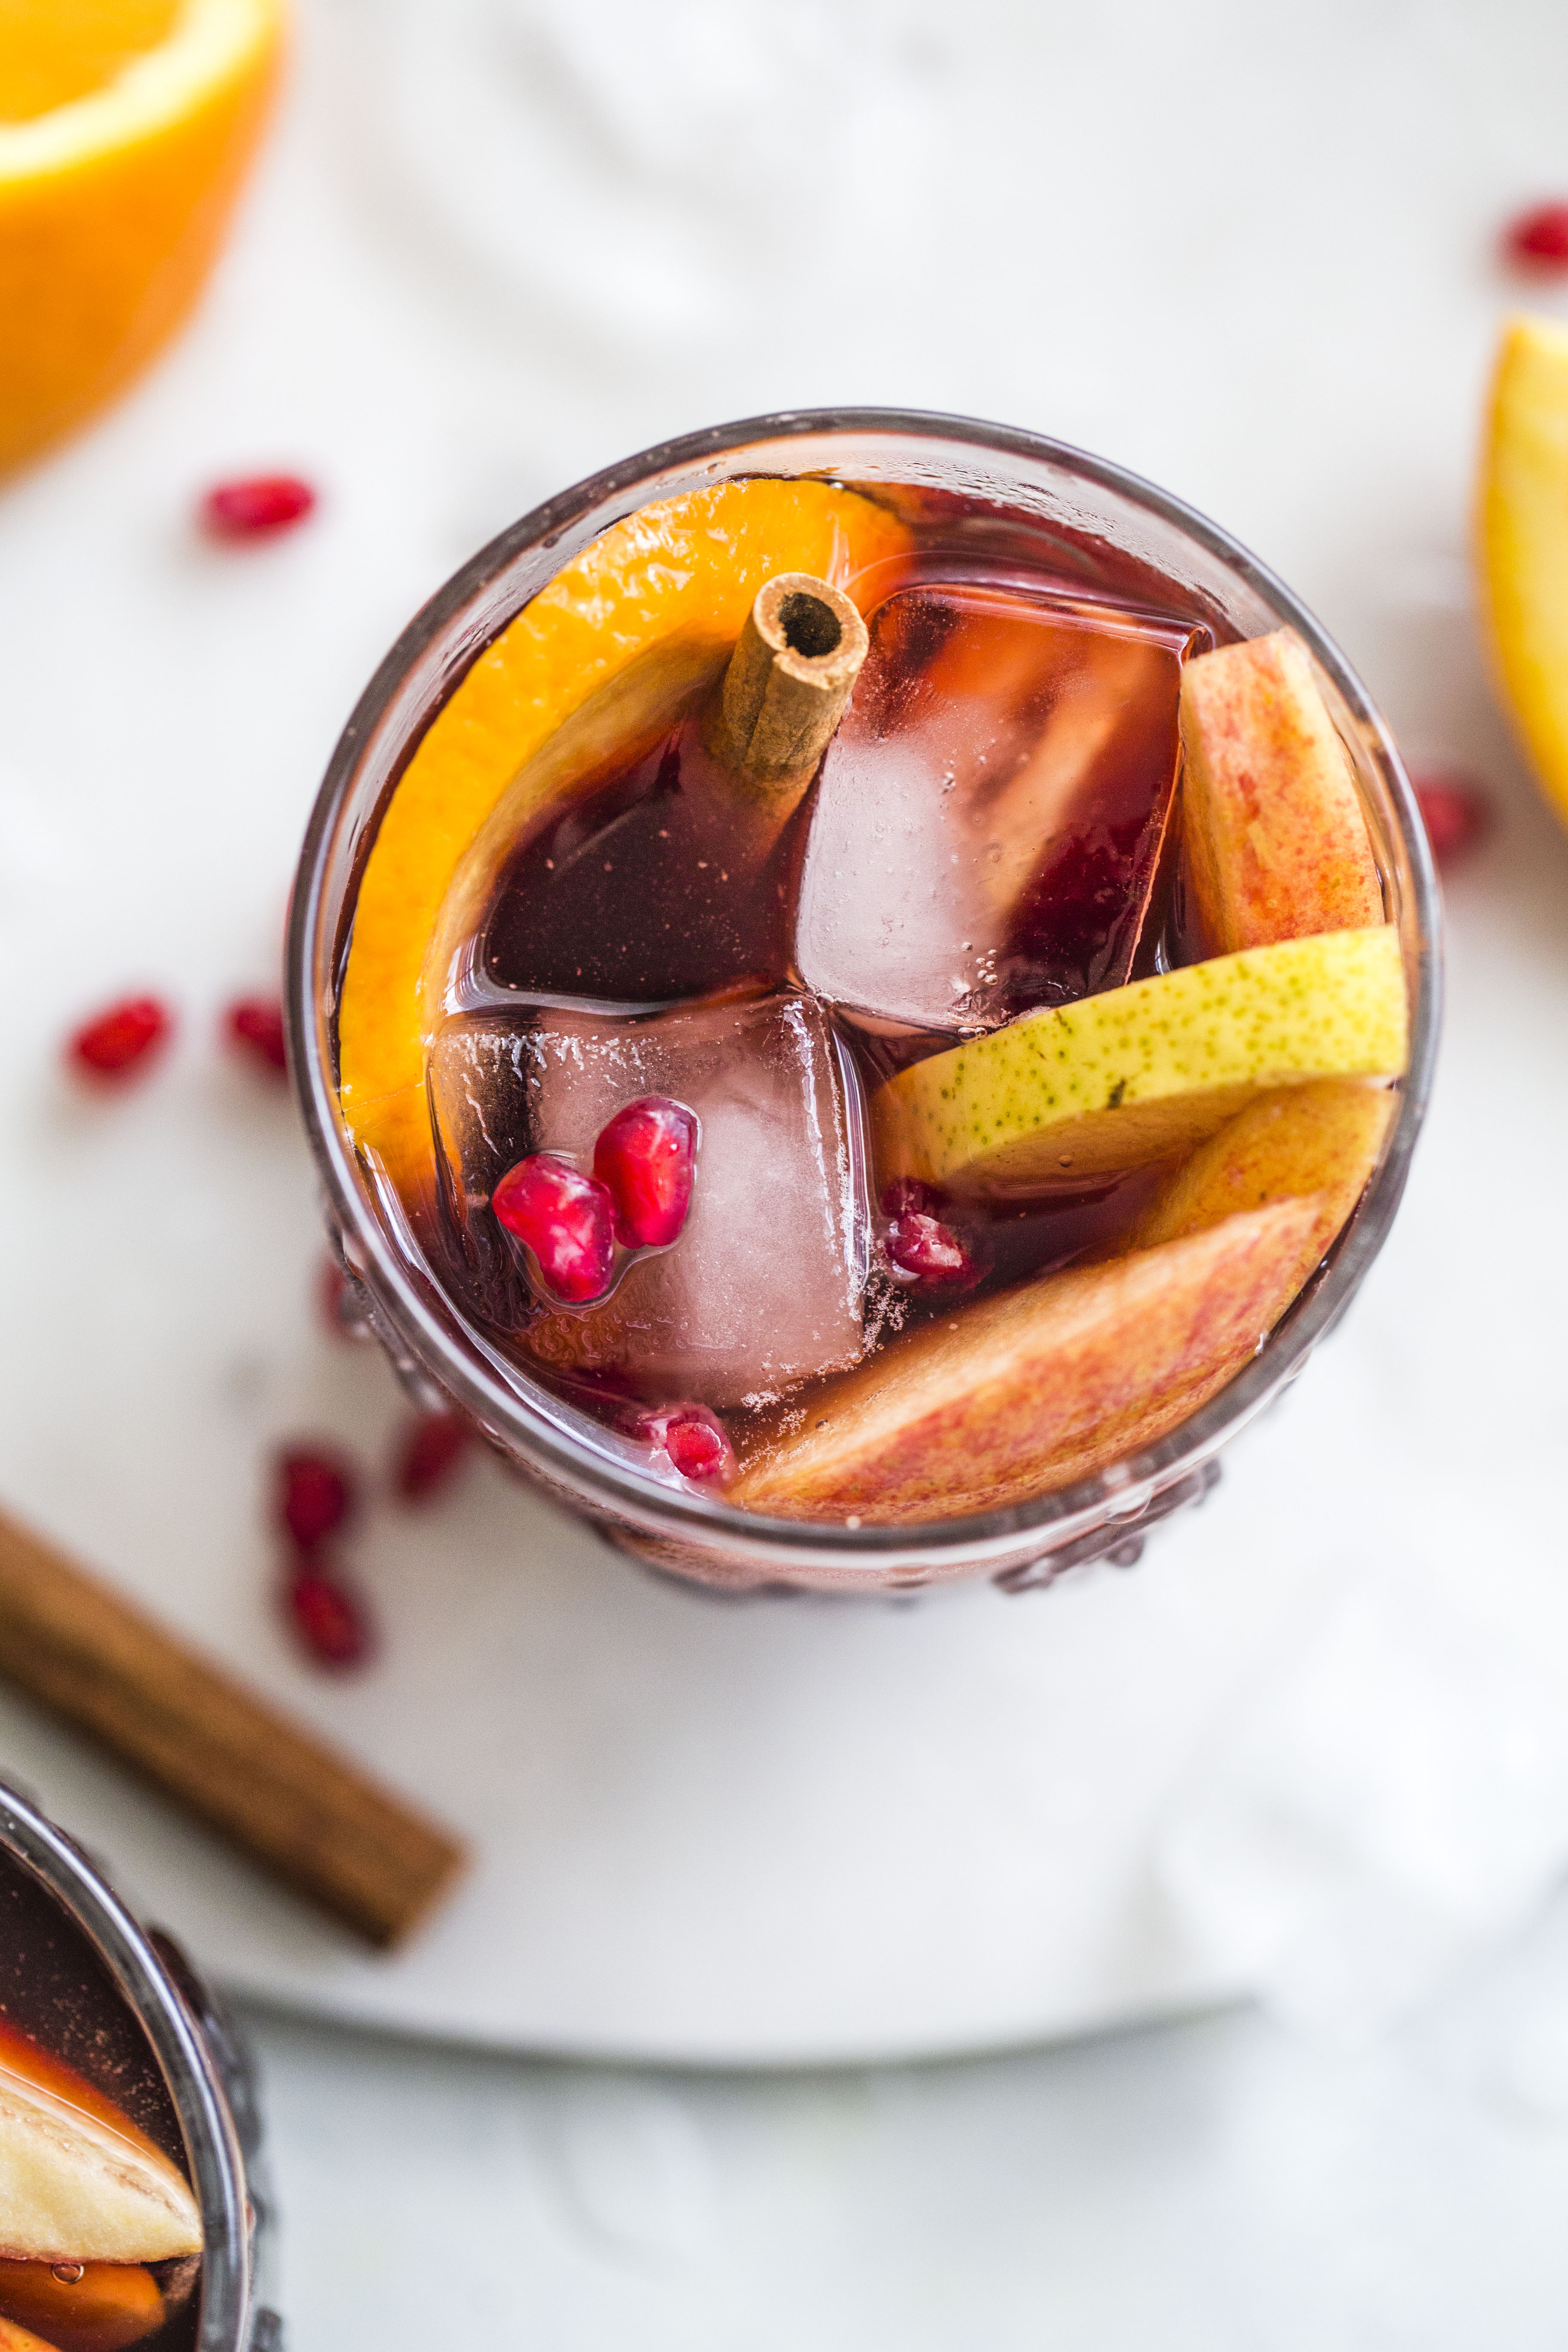 Pomegranate sangria is the best winter sangria ever! It comes in the form of delicious pomegranate vanilla sangria with lots of red wine and brandy. It's perfect for the cooler months and it will warm you right up. I howsweeteats.com #pomegranate #sangria